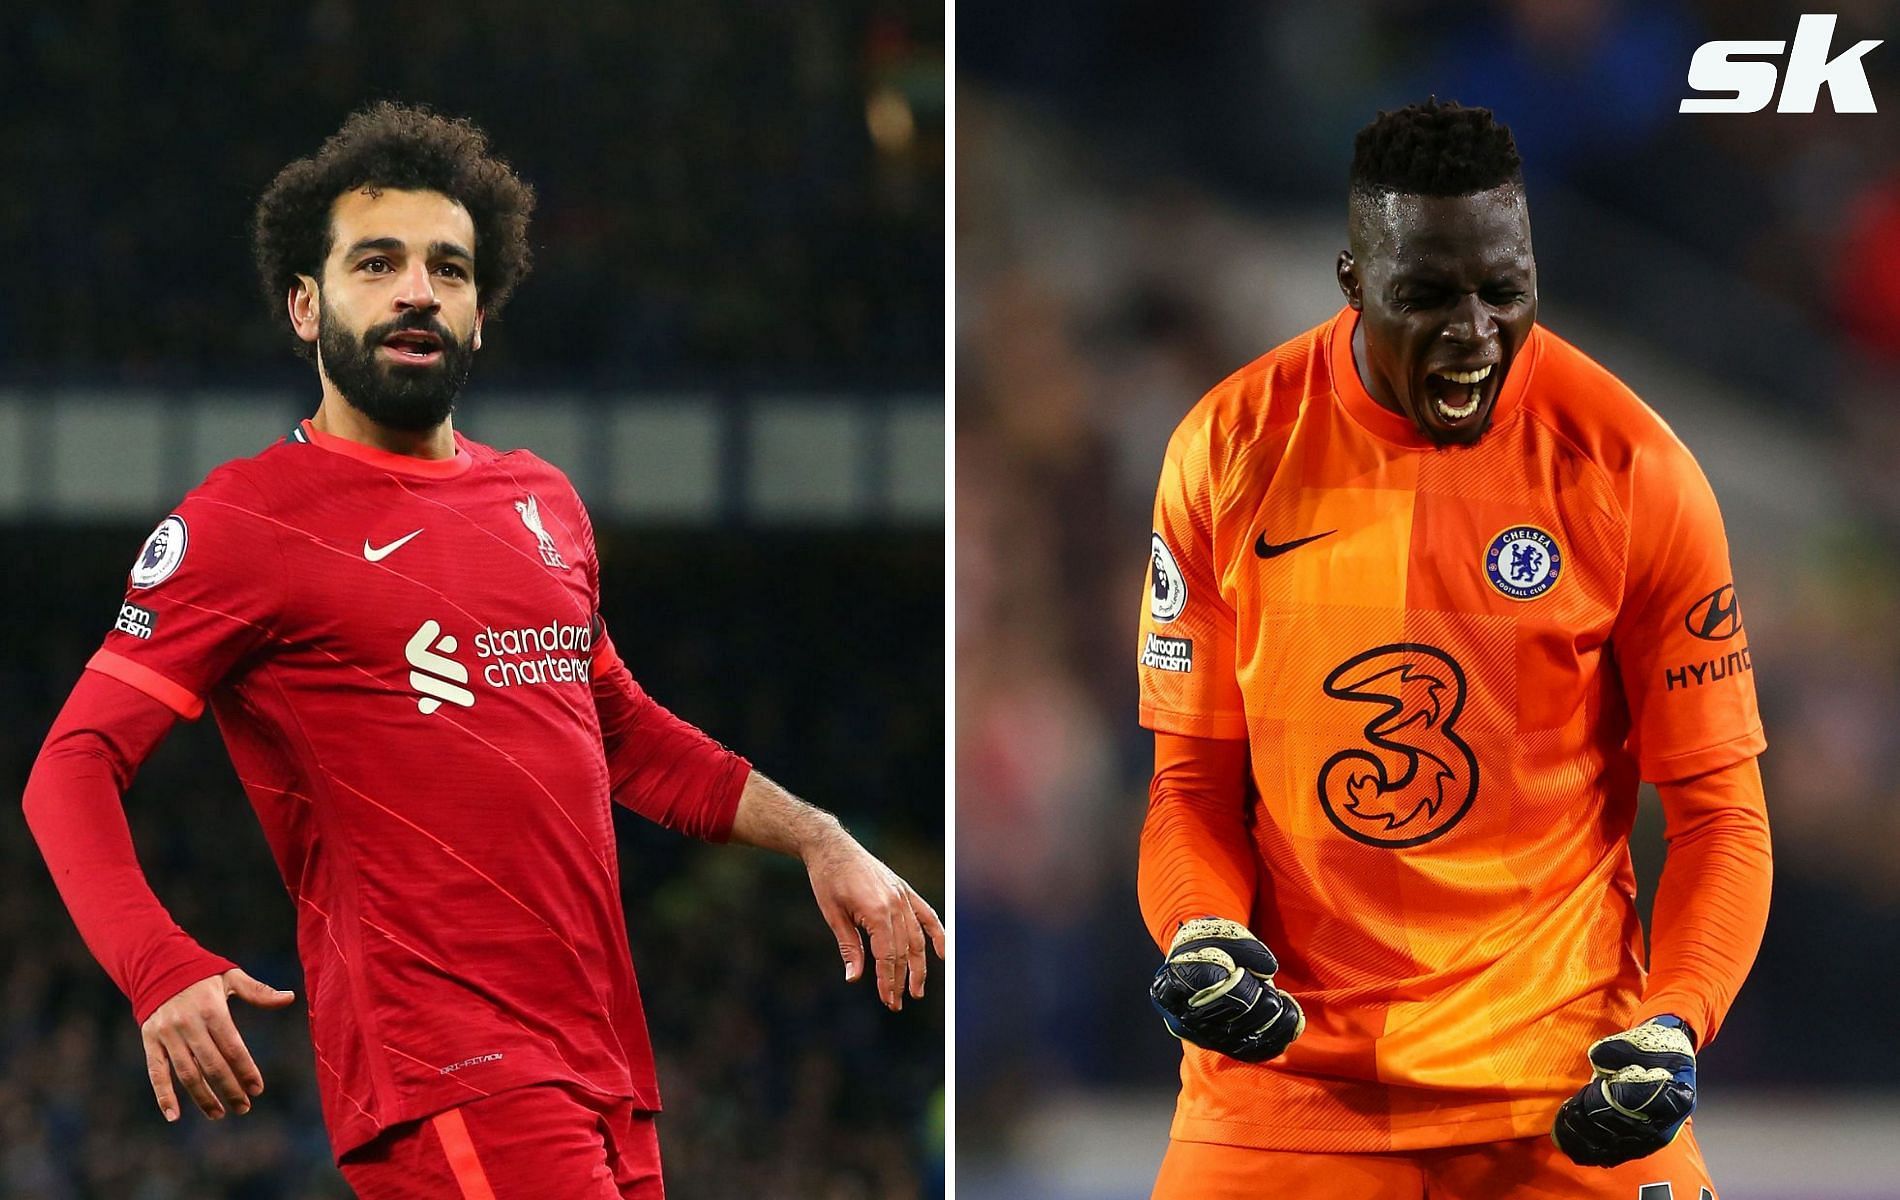 Premier League stars Mohamed Salah and Edouard Mendy will be huge misses for their respective clubs during AFCON.